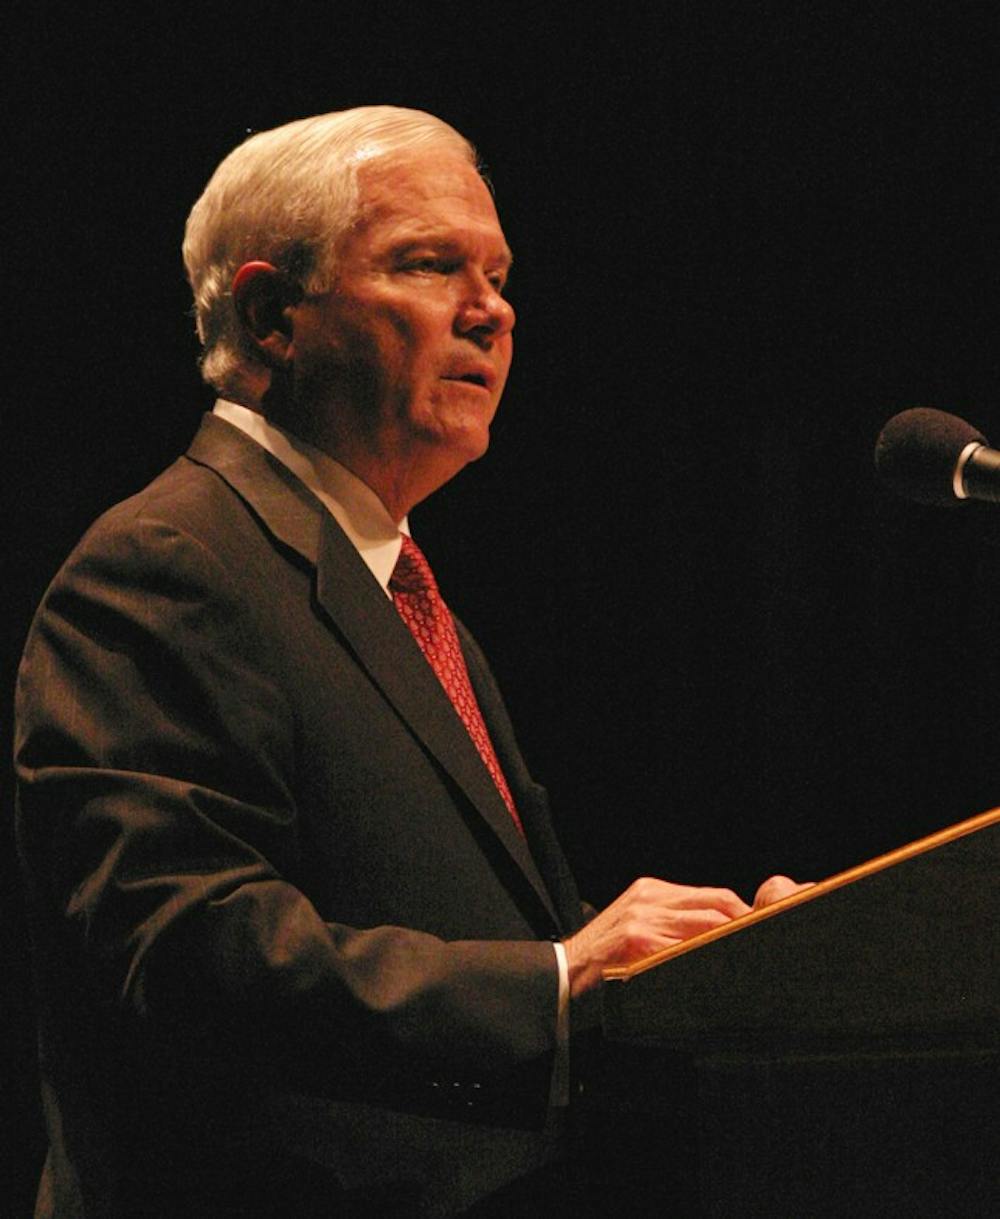 Secretary of Defense Robert Gates spoke at Duke University on Wednesday. “If America’s best and brightest young people will not step forward, who then can we count on to protect and sustain the greatness of the country?” he said. 